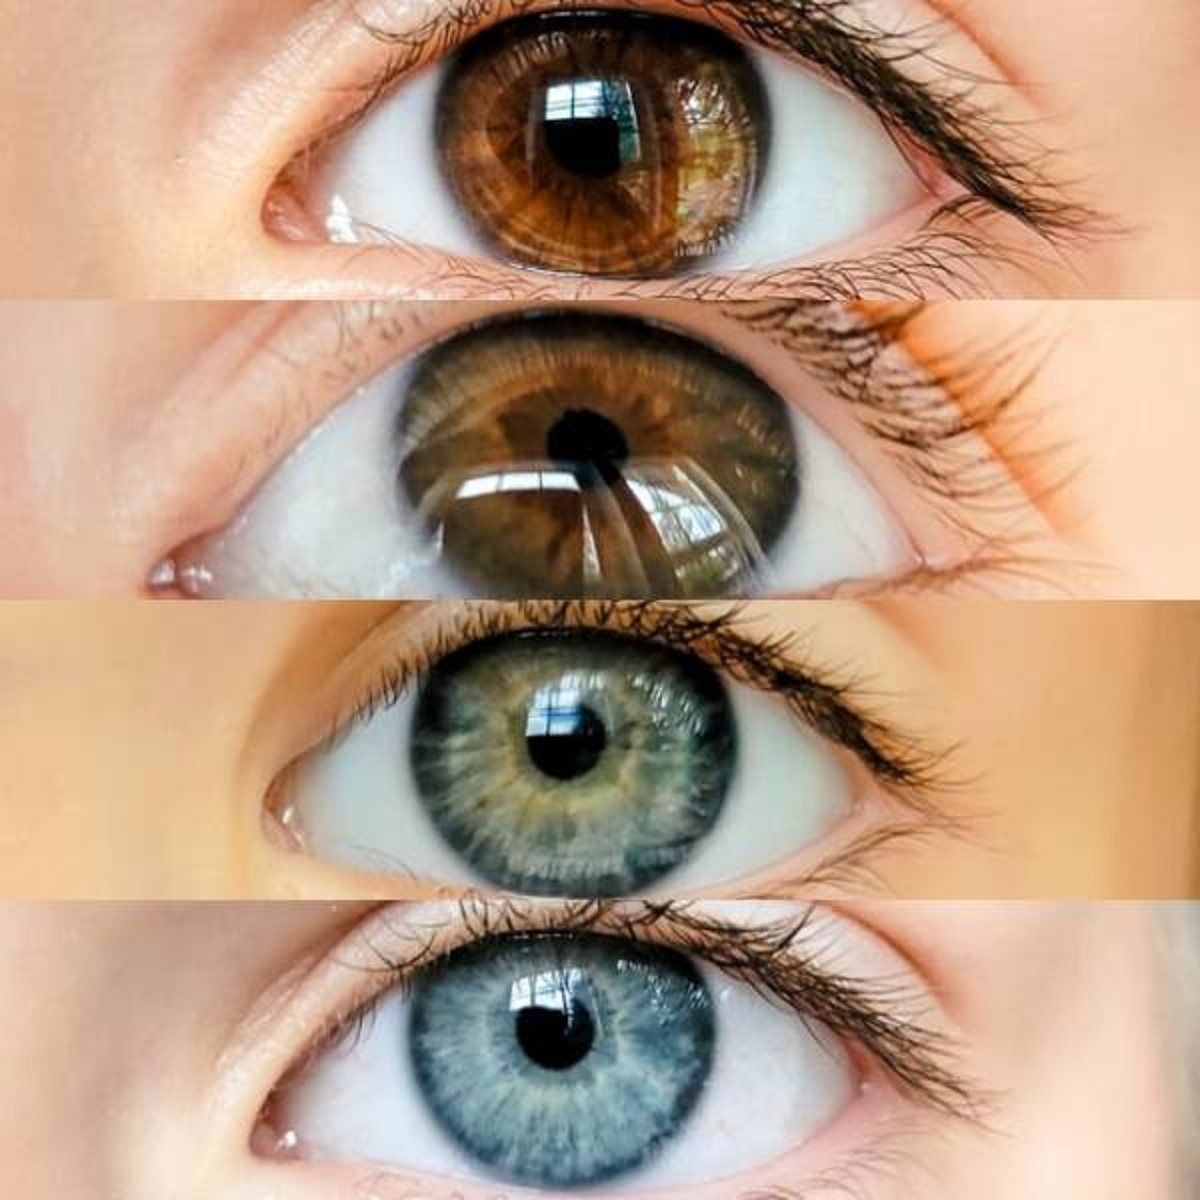 "My husband has brown eyes, I have blue. These are our four children's eyes."